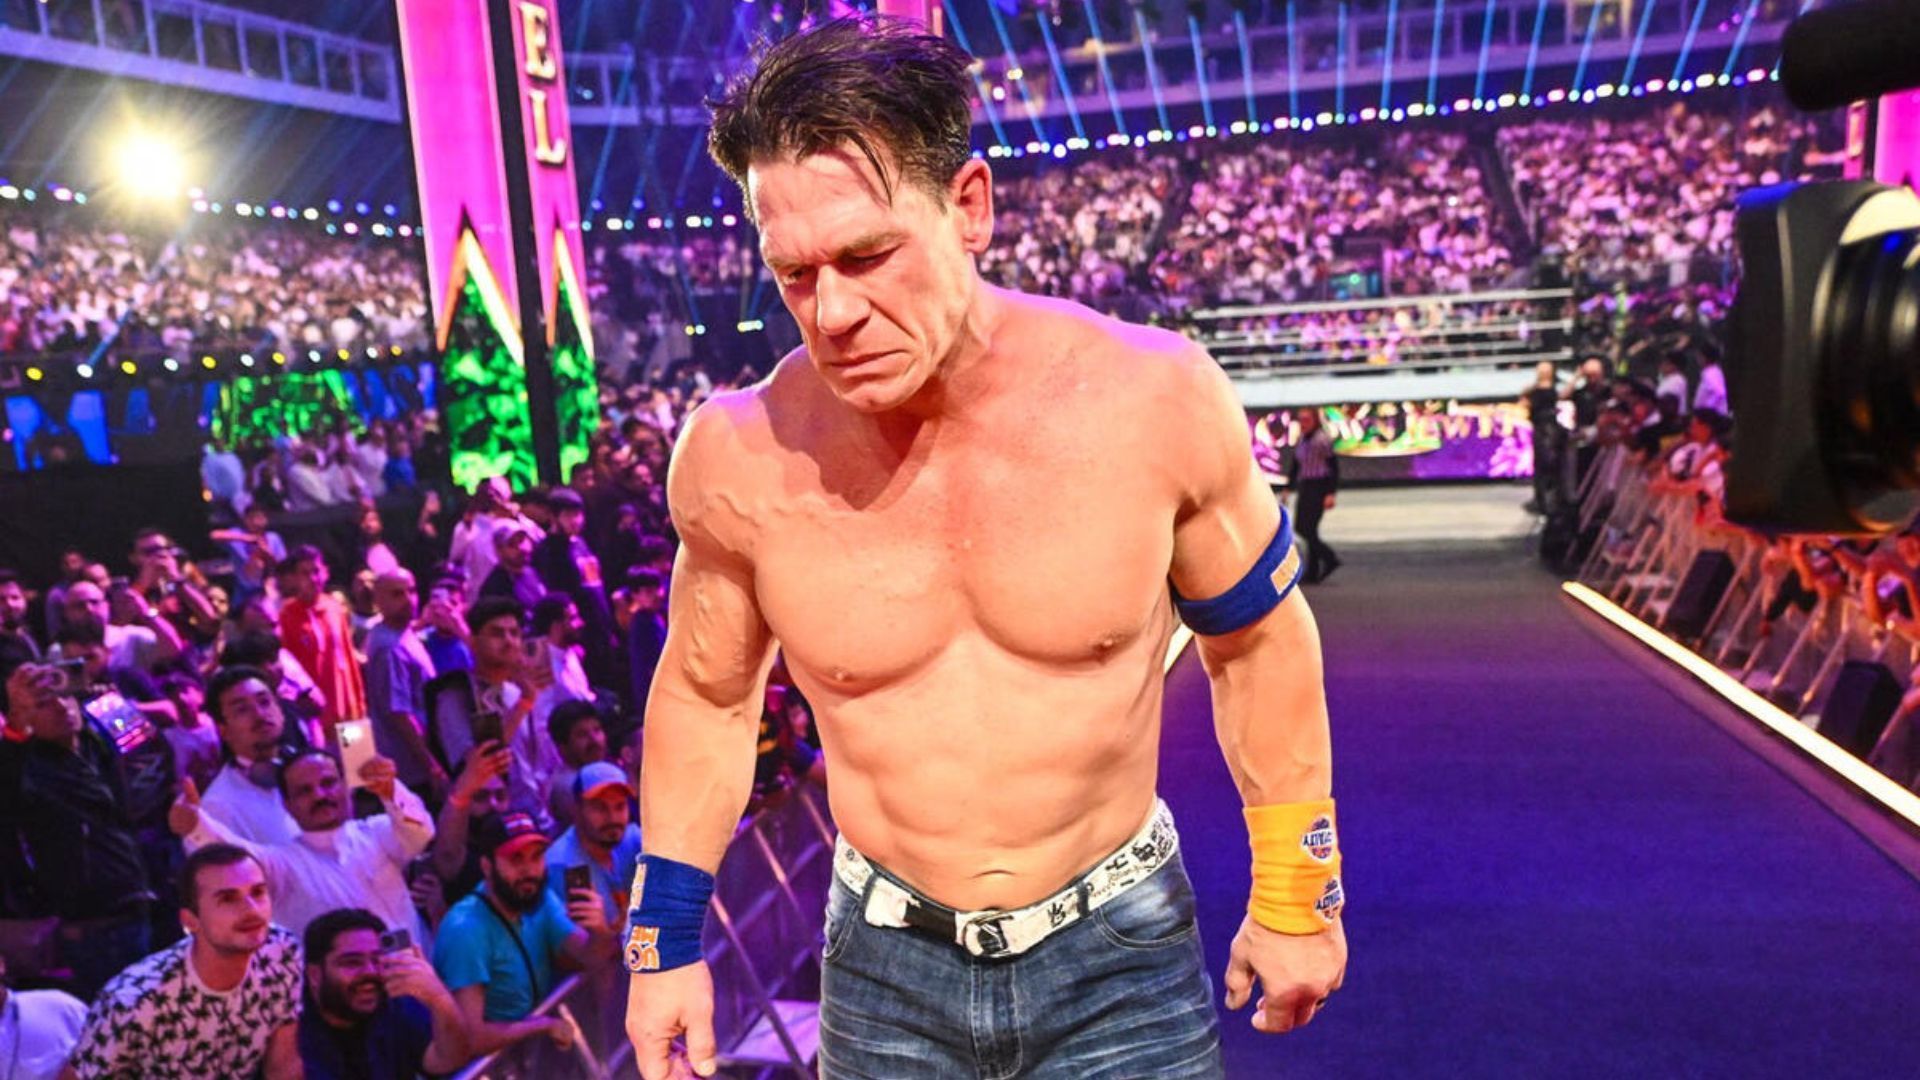 John Cena is one of the most recognizable names in pro-wrestling